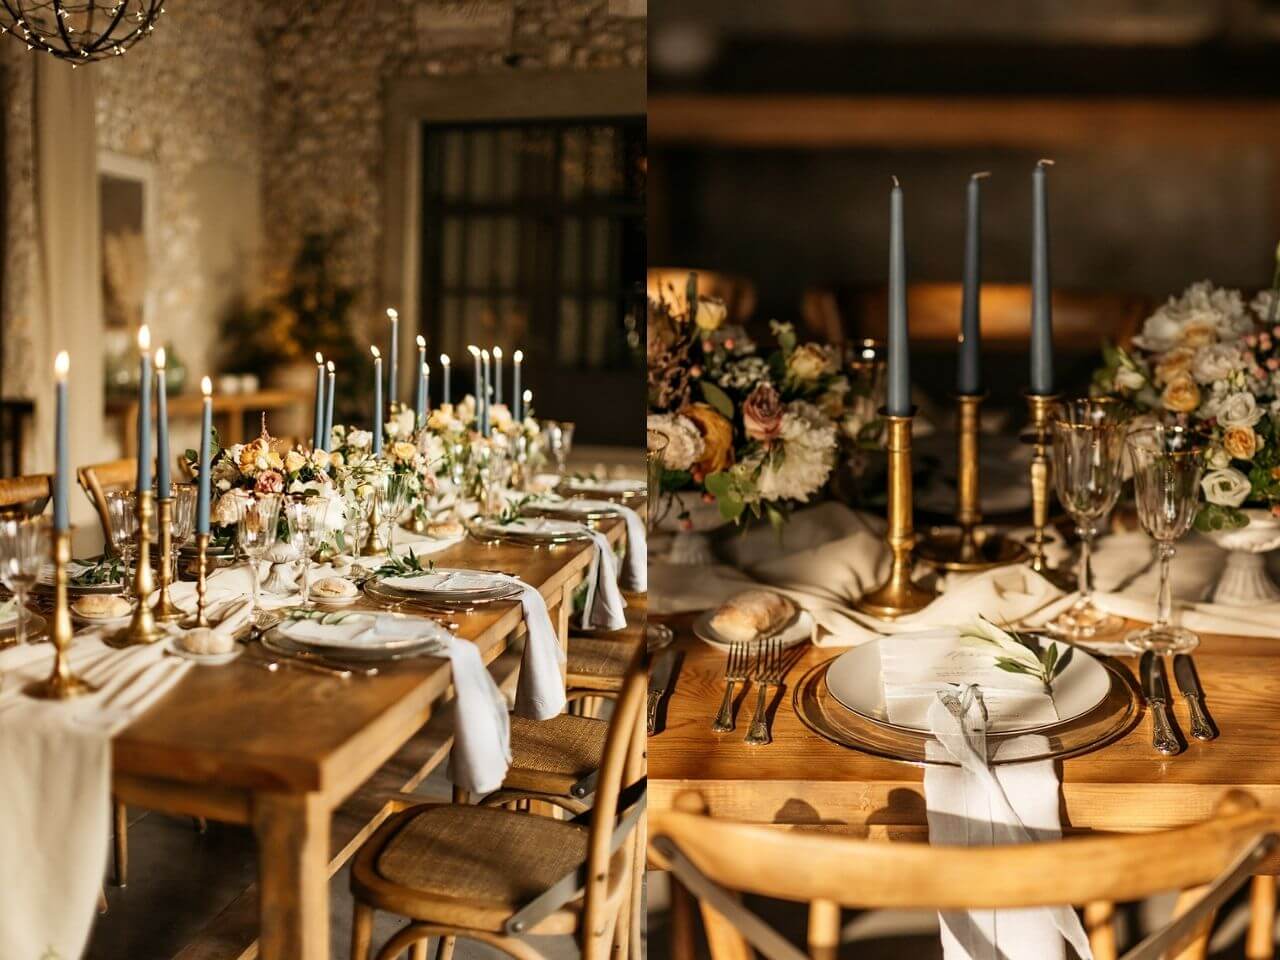 Repas de mariage Provence By Mademoiselle C